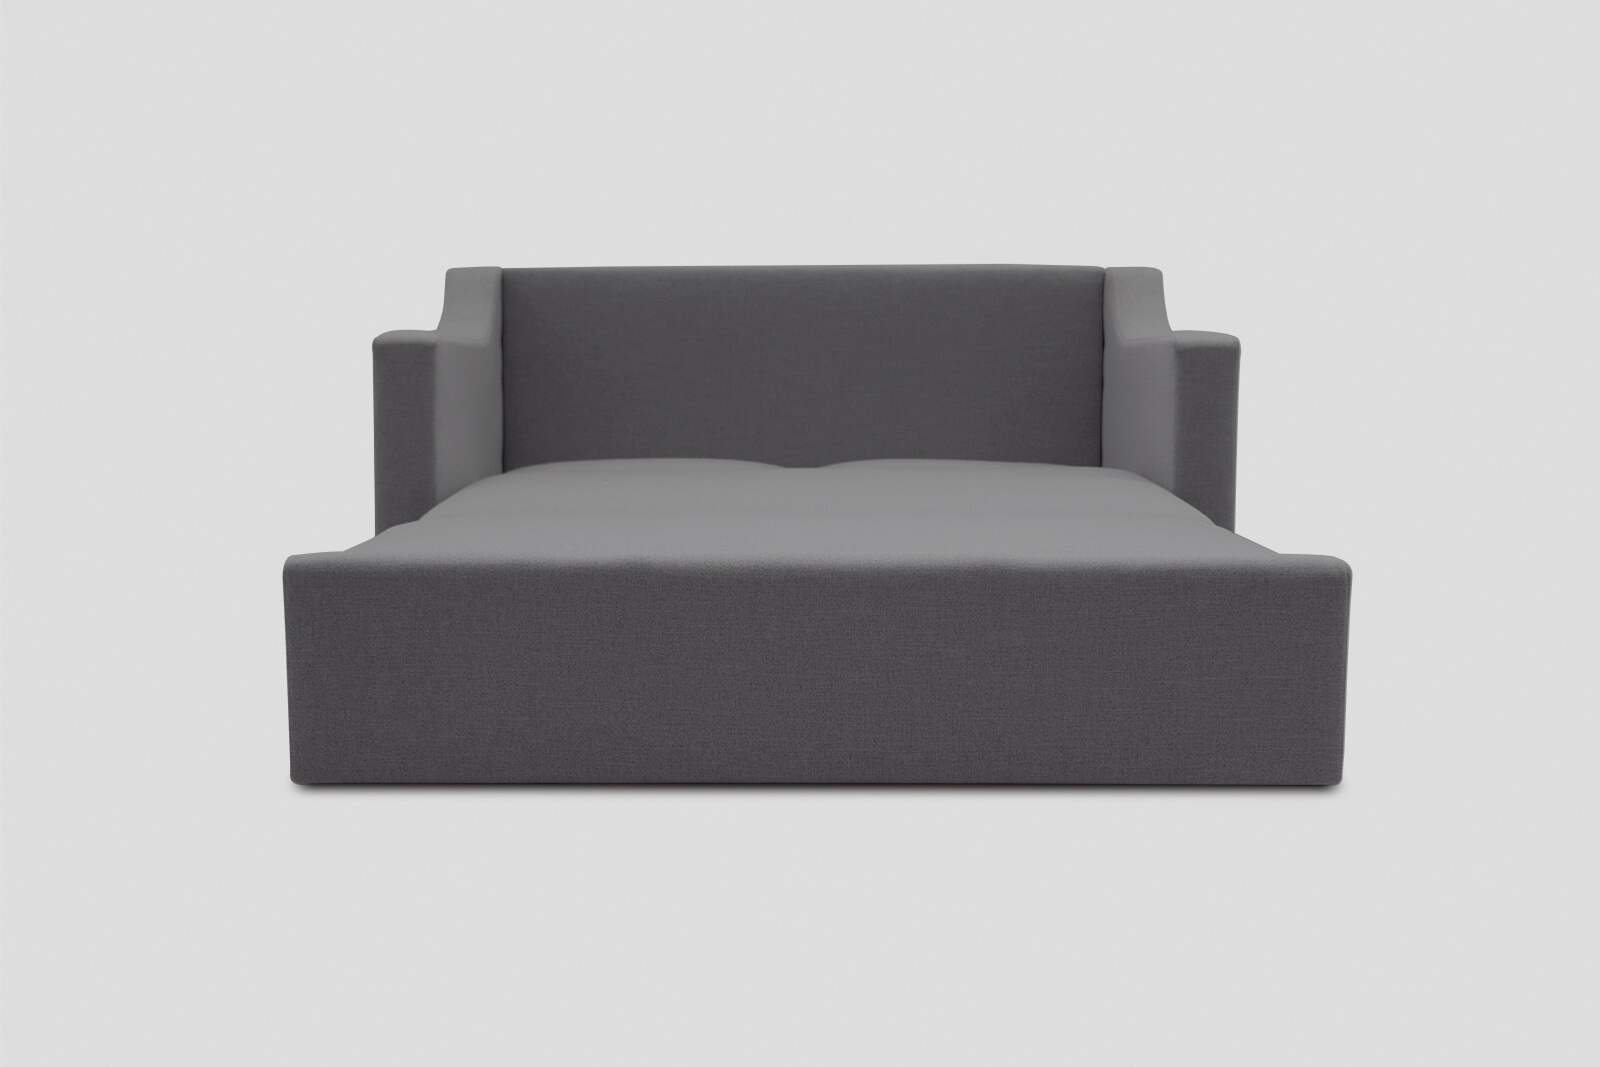 HBSB02-double-sofa-bed-seal-front-bed